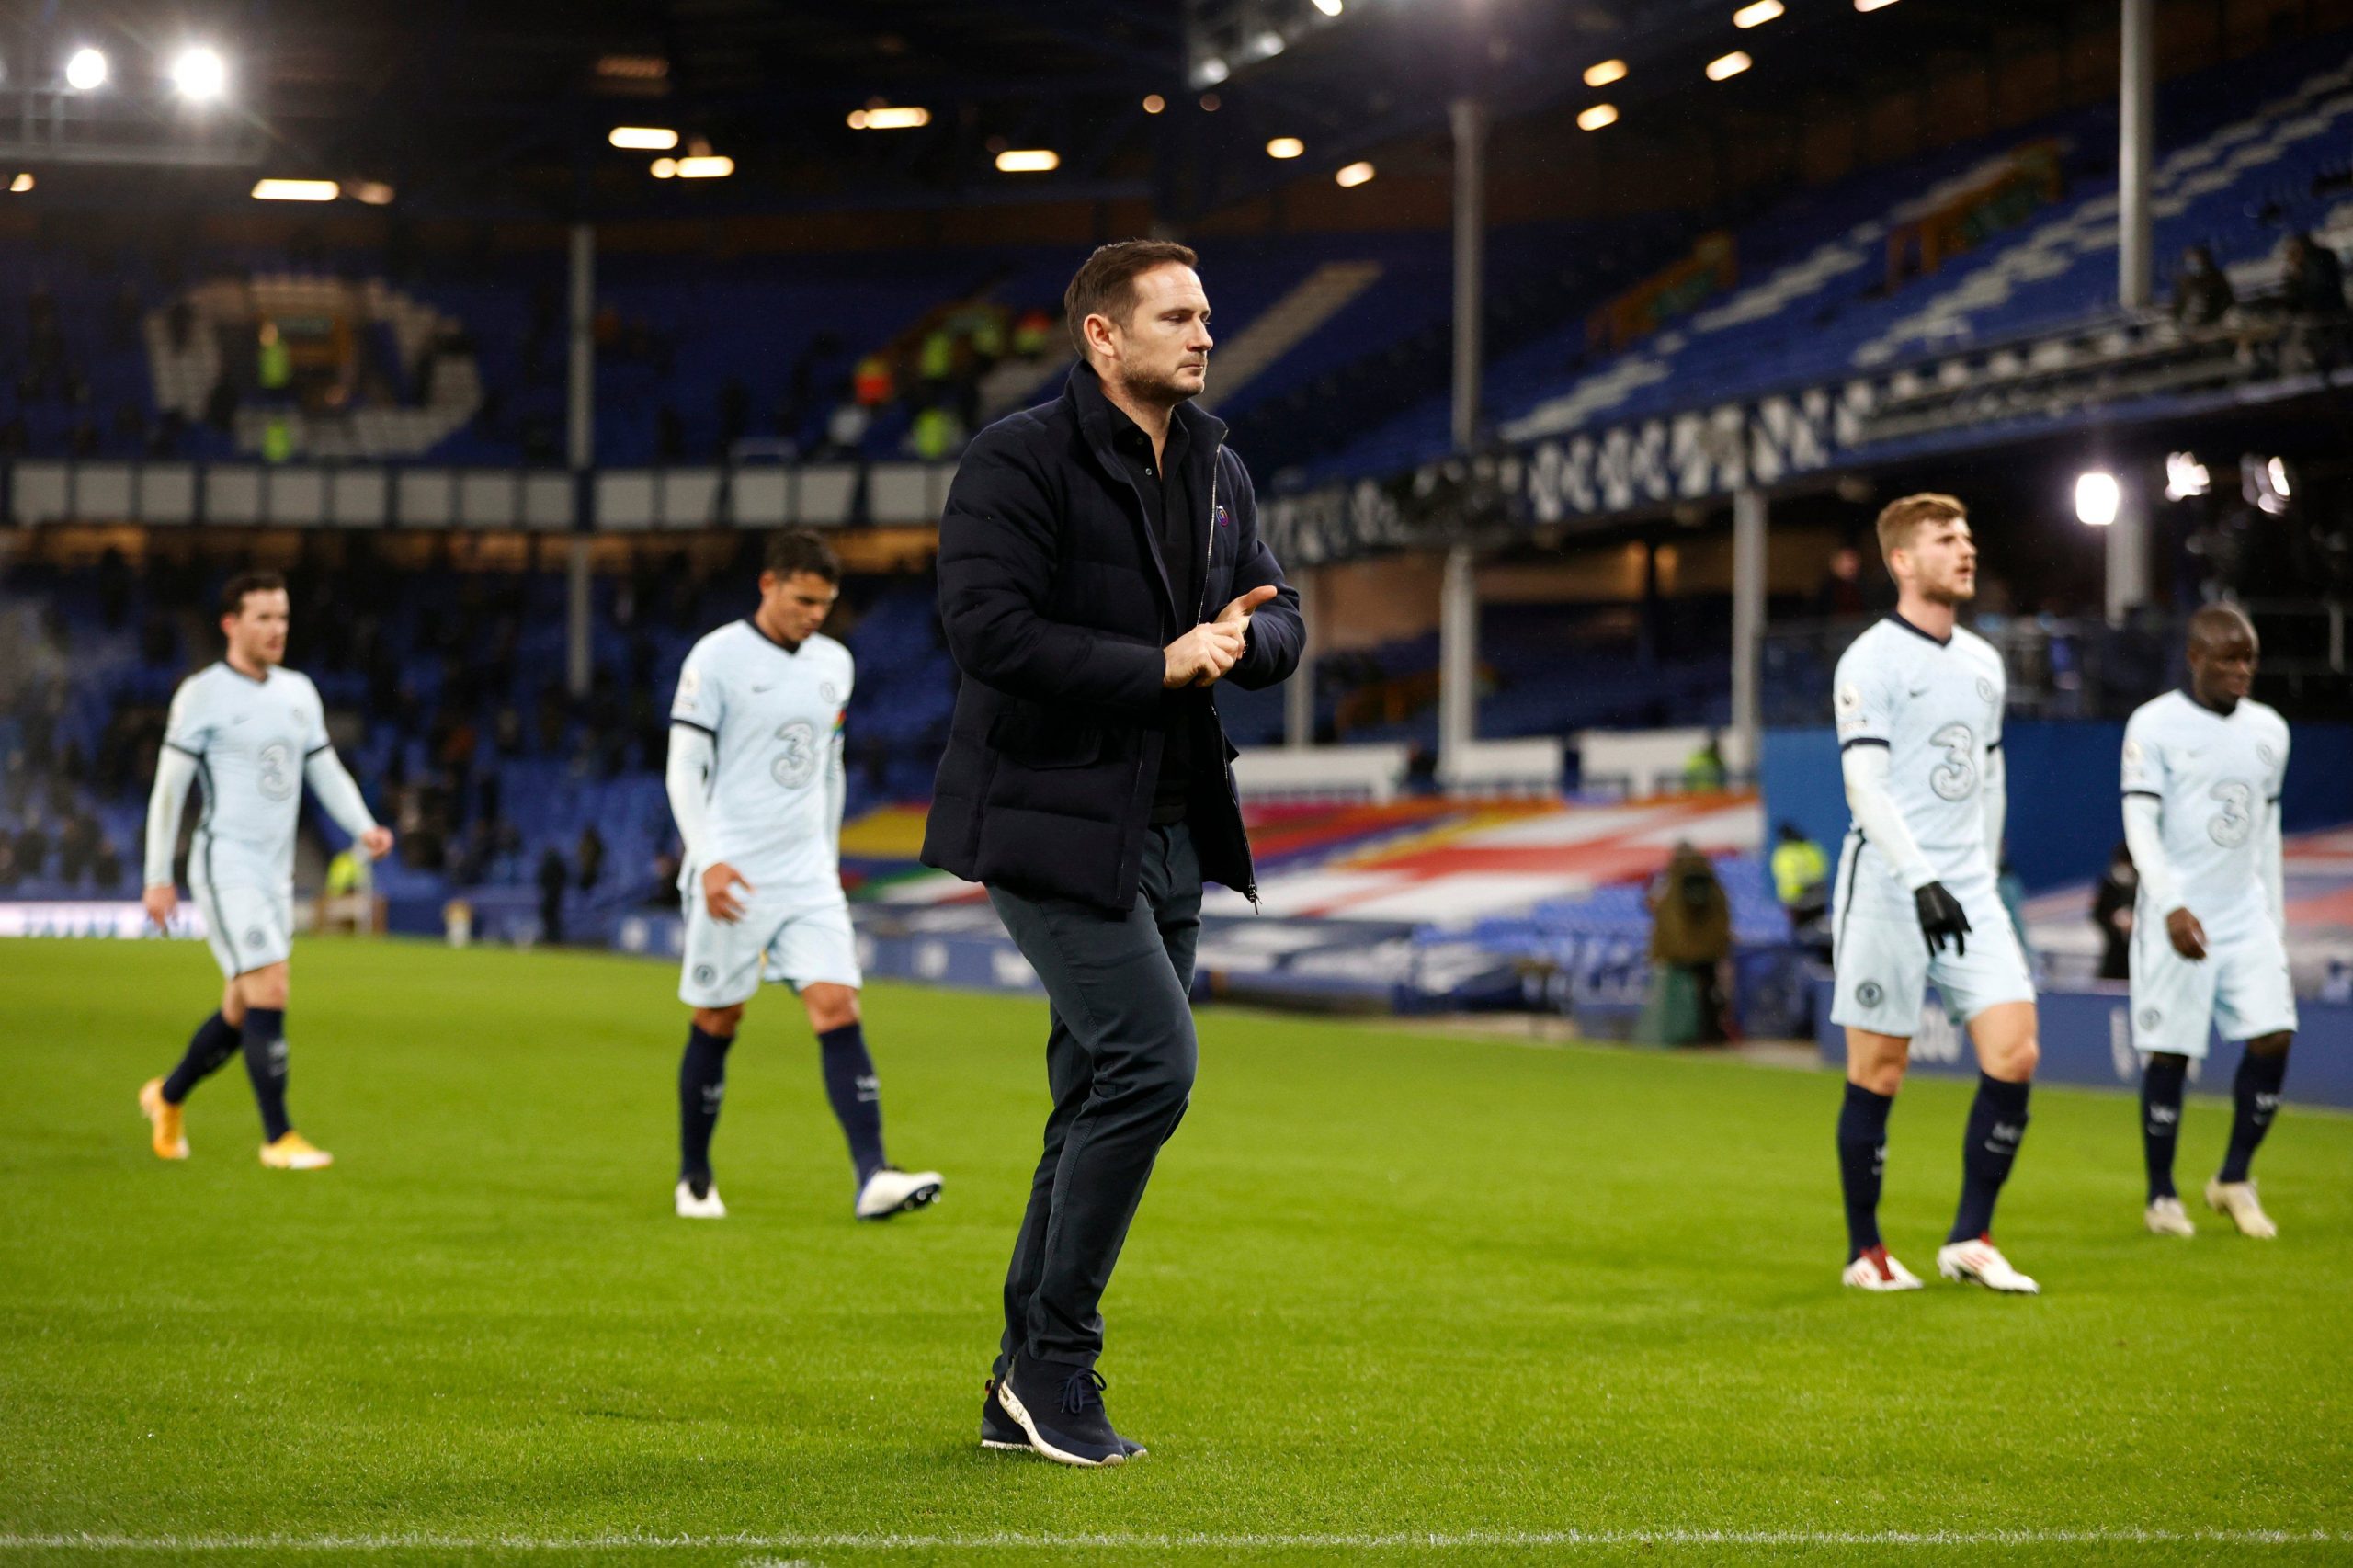 Frank Lampard says Chelsea title talk ‘ridiculous’ after defeat at Everton